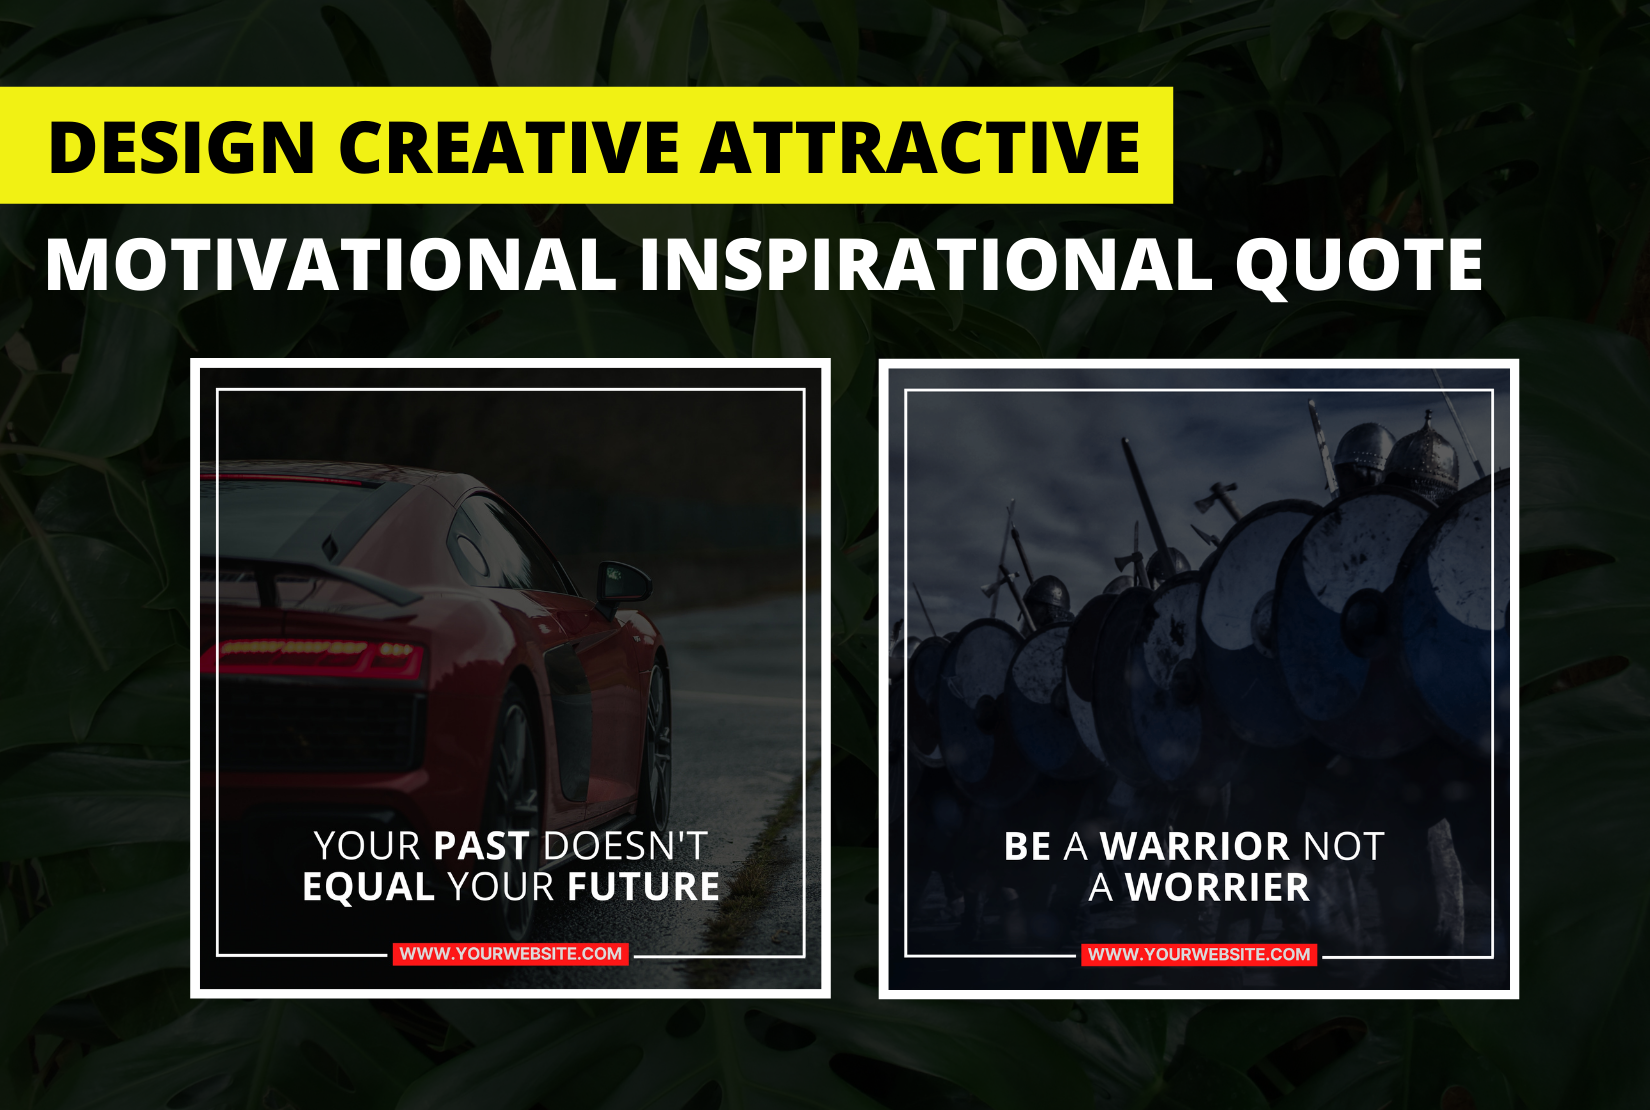 I will Design creative attractive motivational inspirational quotes